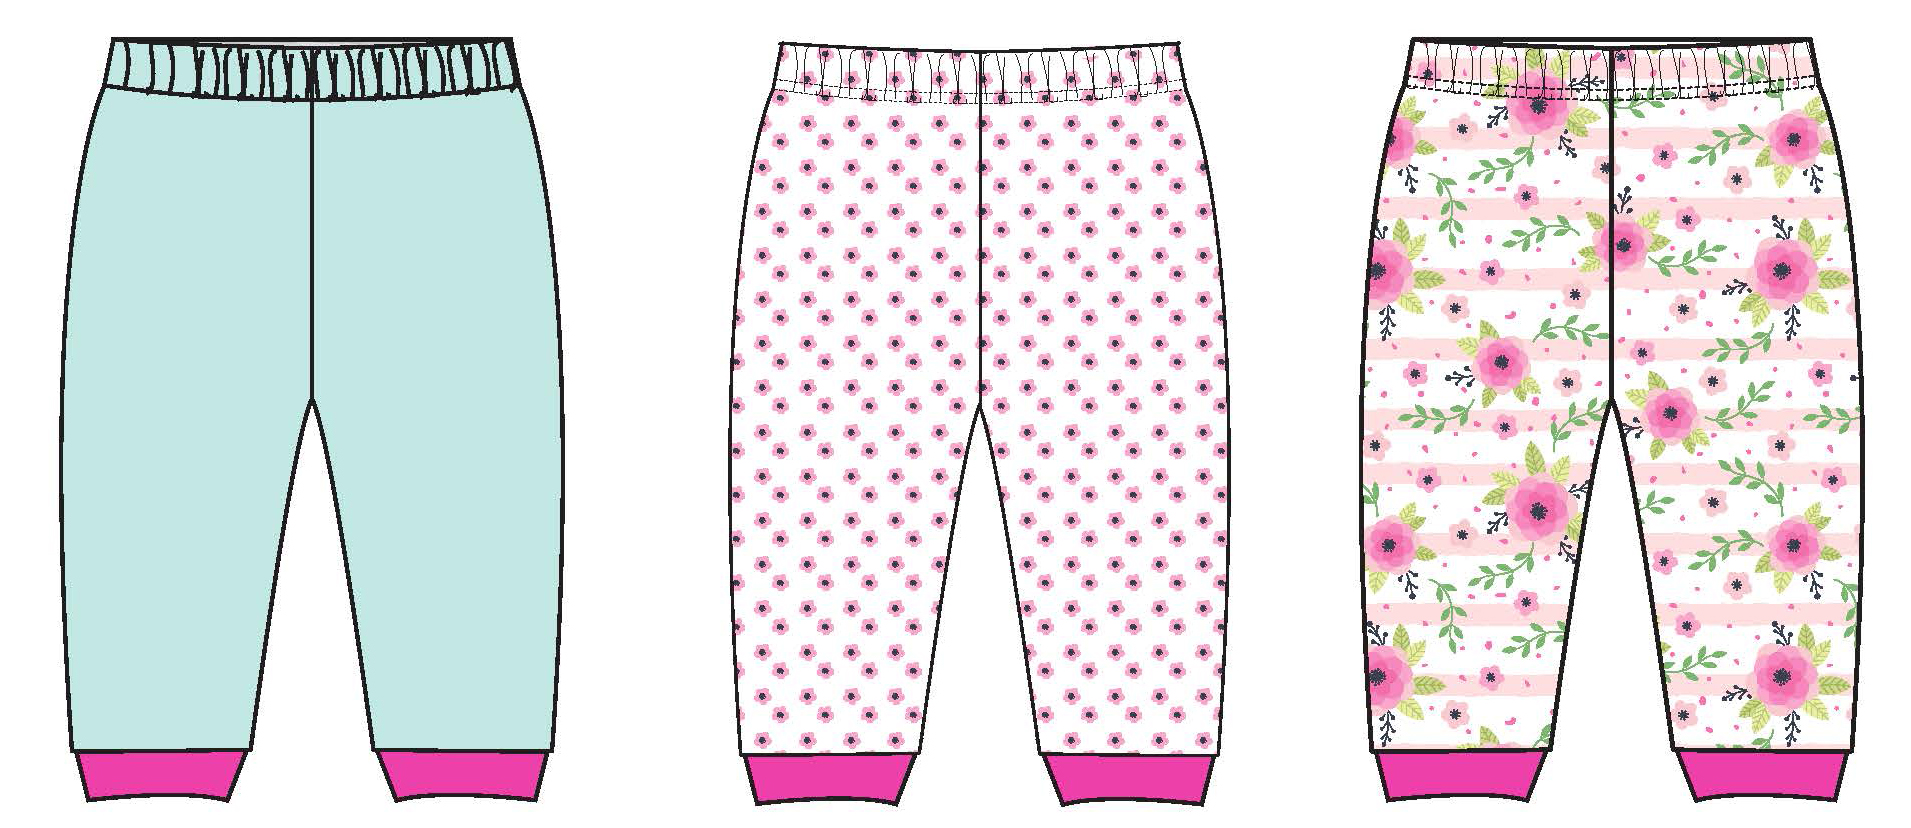 Baby Girl's Printed Pull-On PANTS w/ Fashion Flower & Solid Print -Sizes 12M-24M - 3-Pack